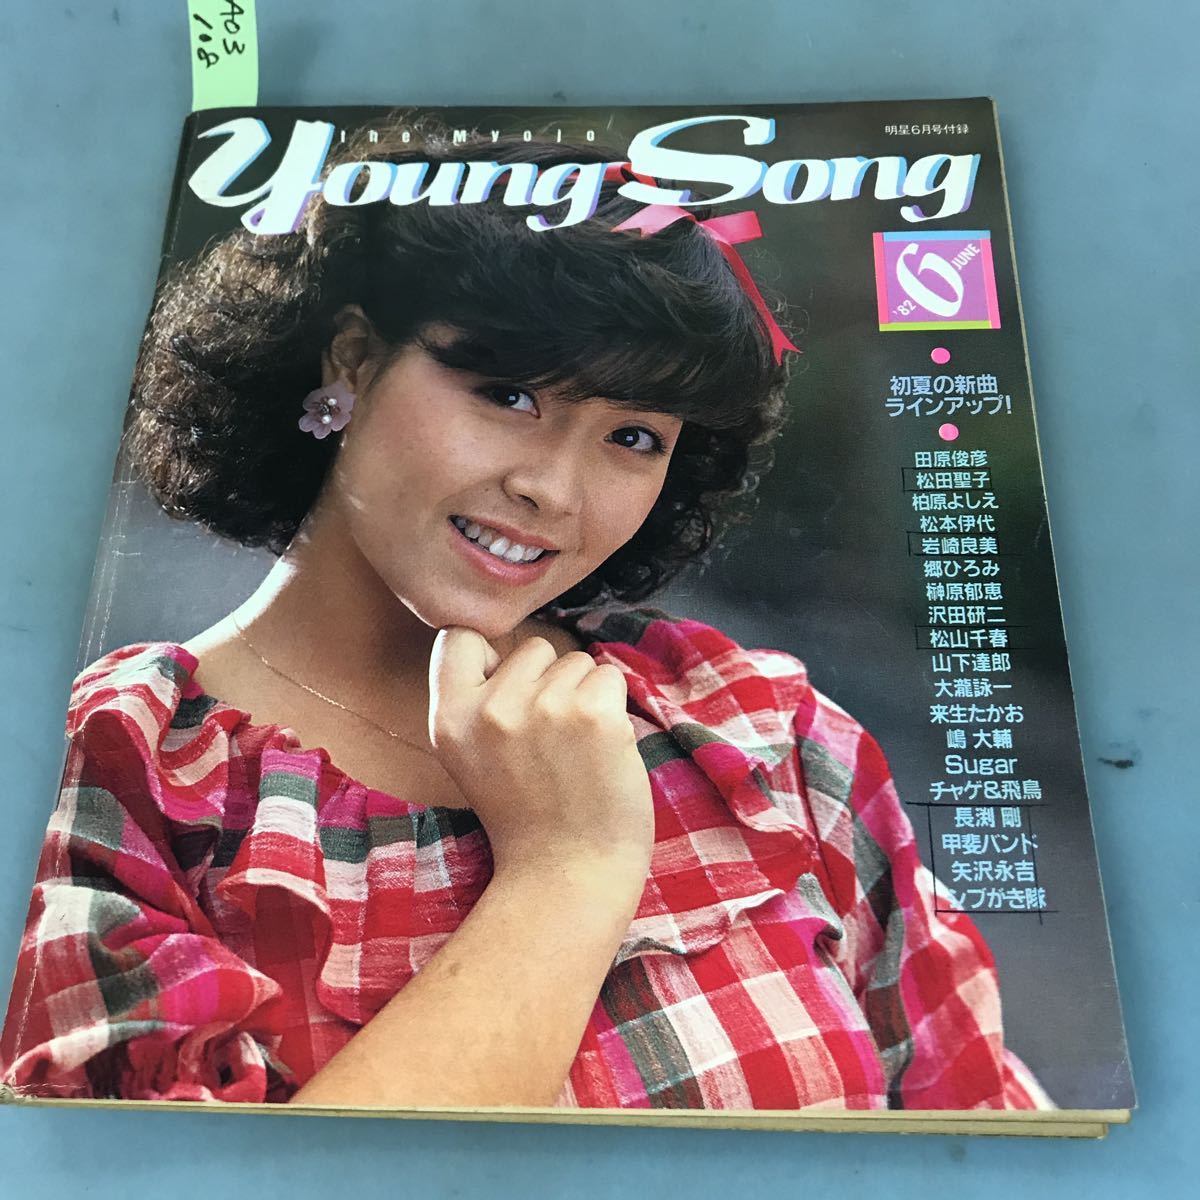 A03-108 YOUNG SONG the Mymjo・1982 6 発表！あなたが選んだヤンソン年間総合ベスト20 明星6月号付録 書き込み有り